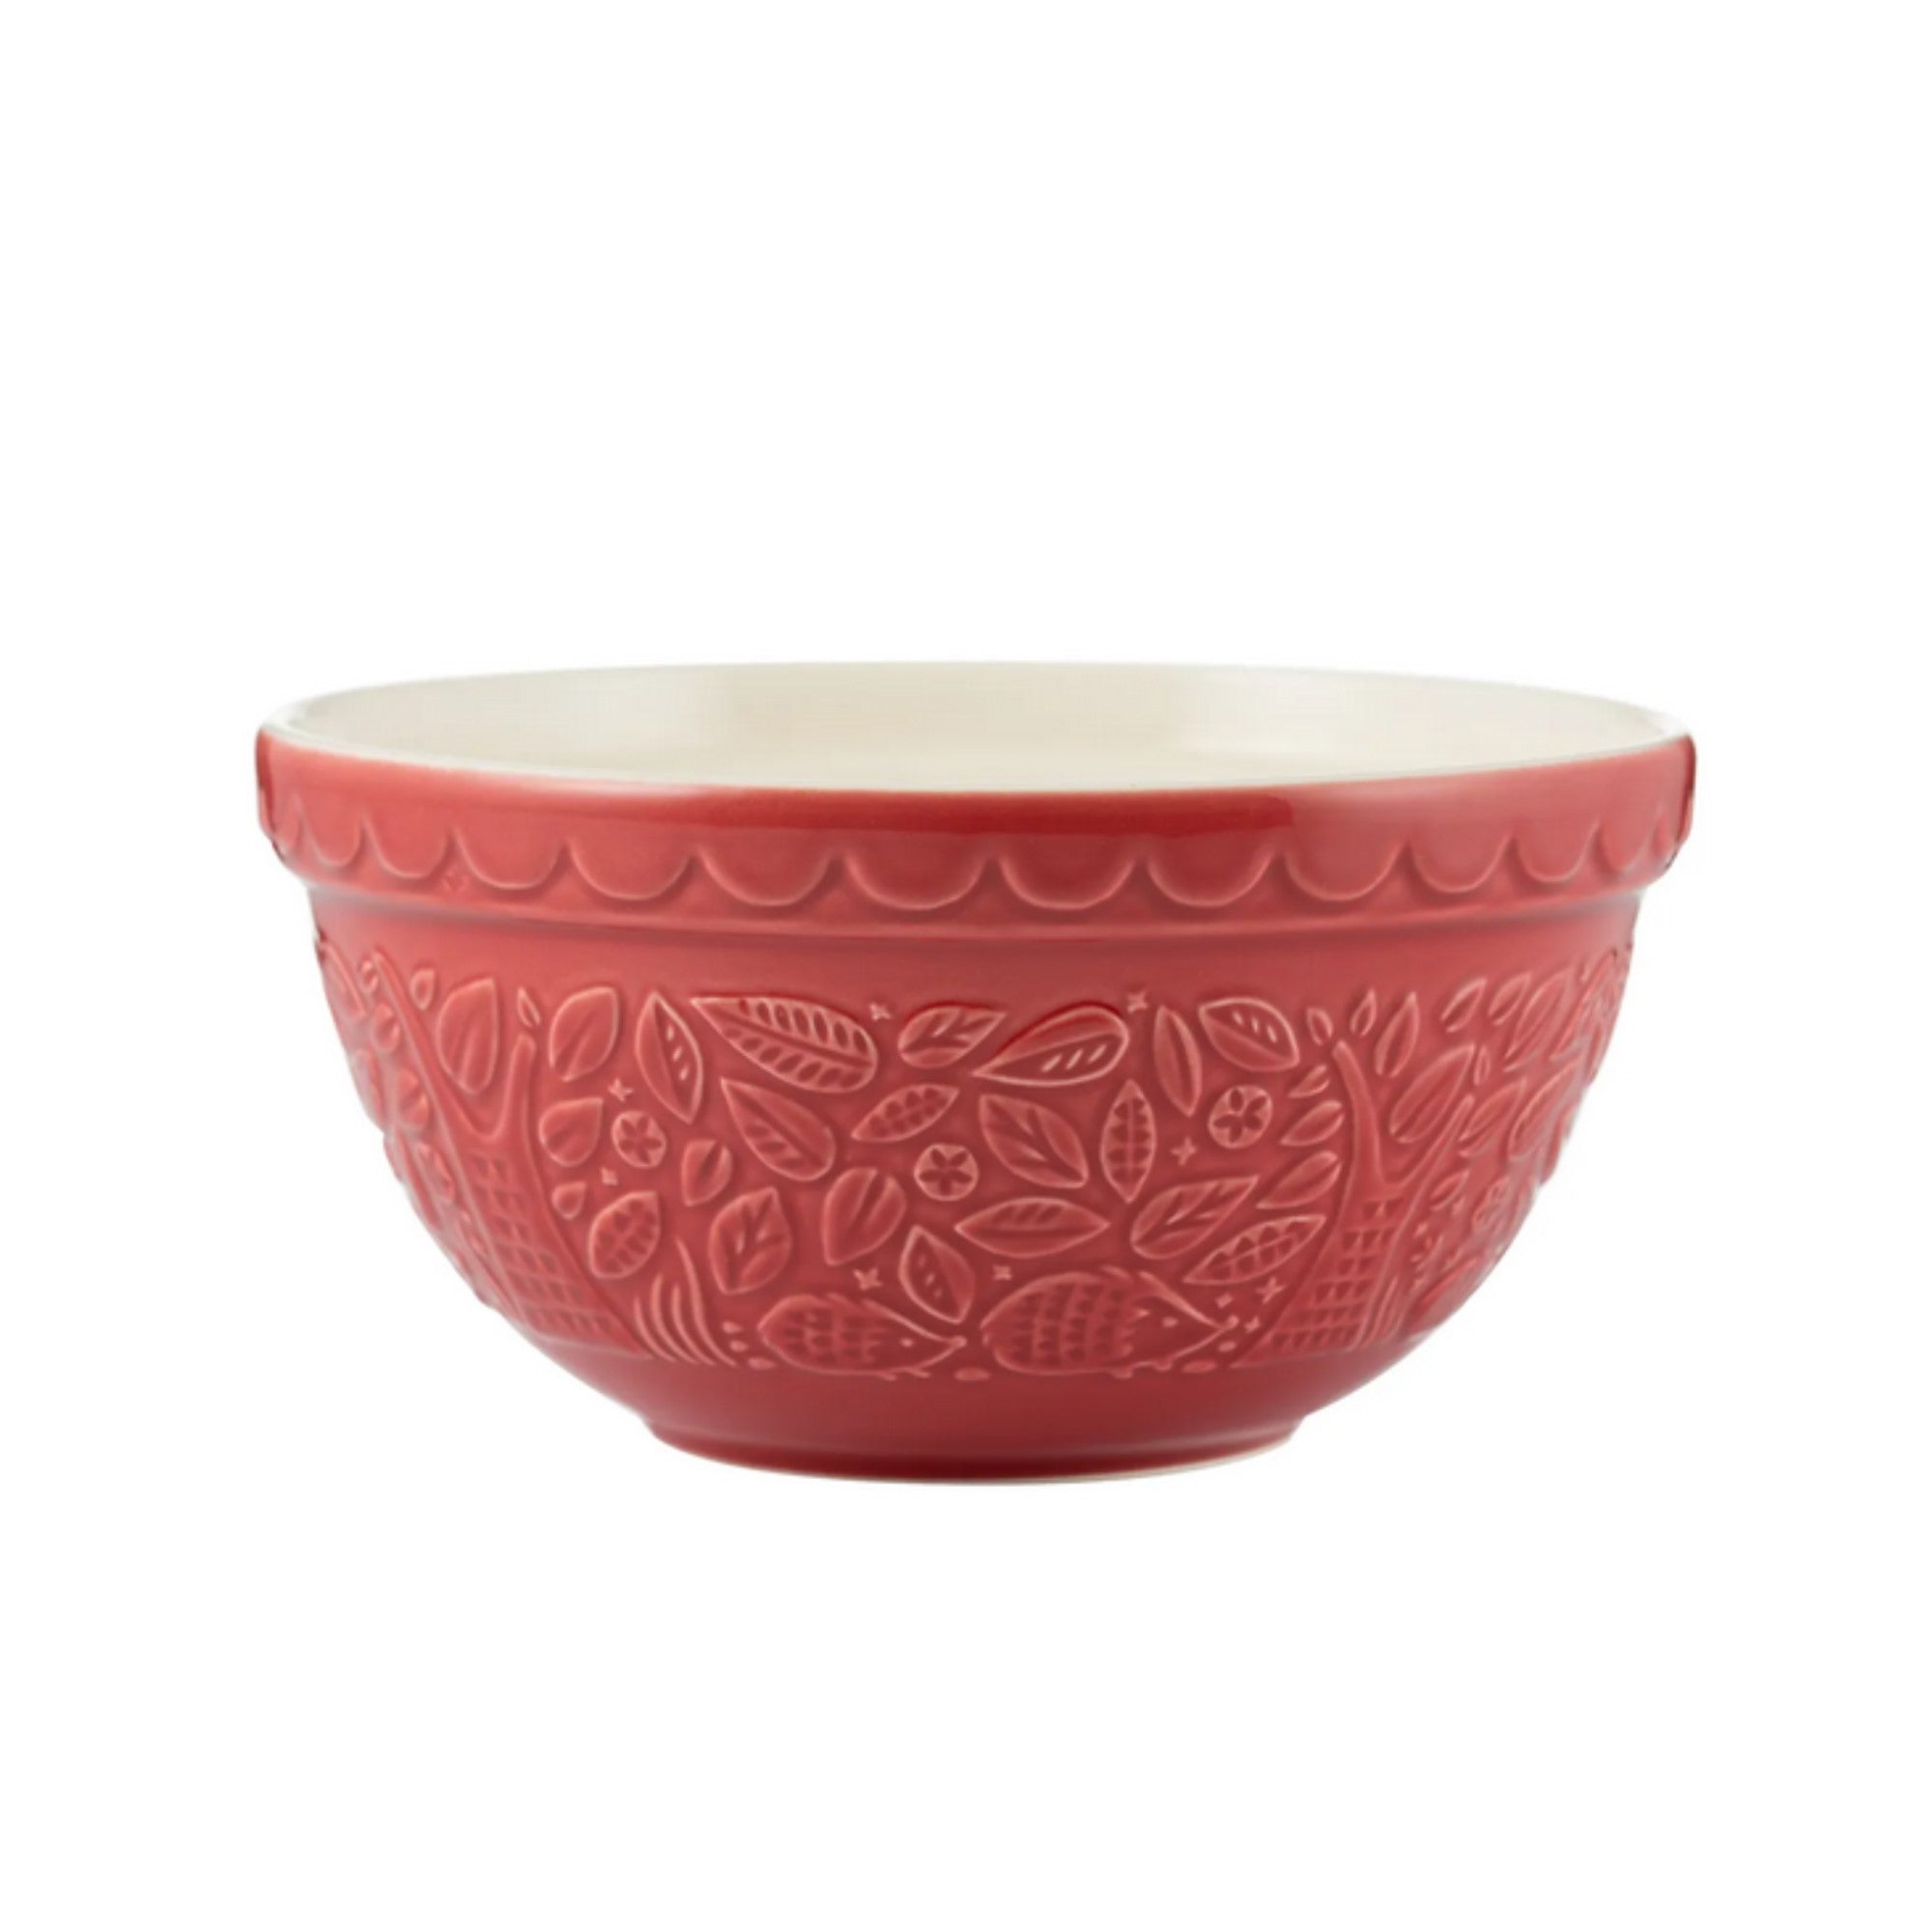 Mason Cash "Into the Forest" Mixing Bowl - Red 21cm